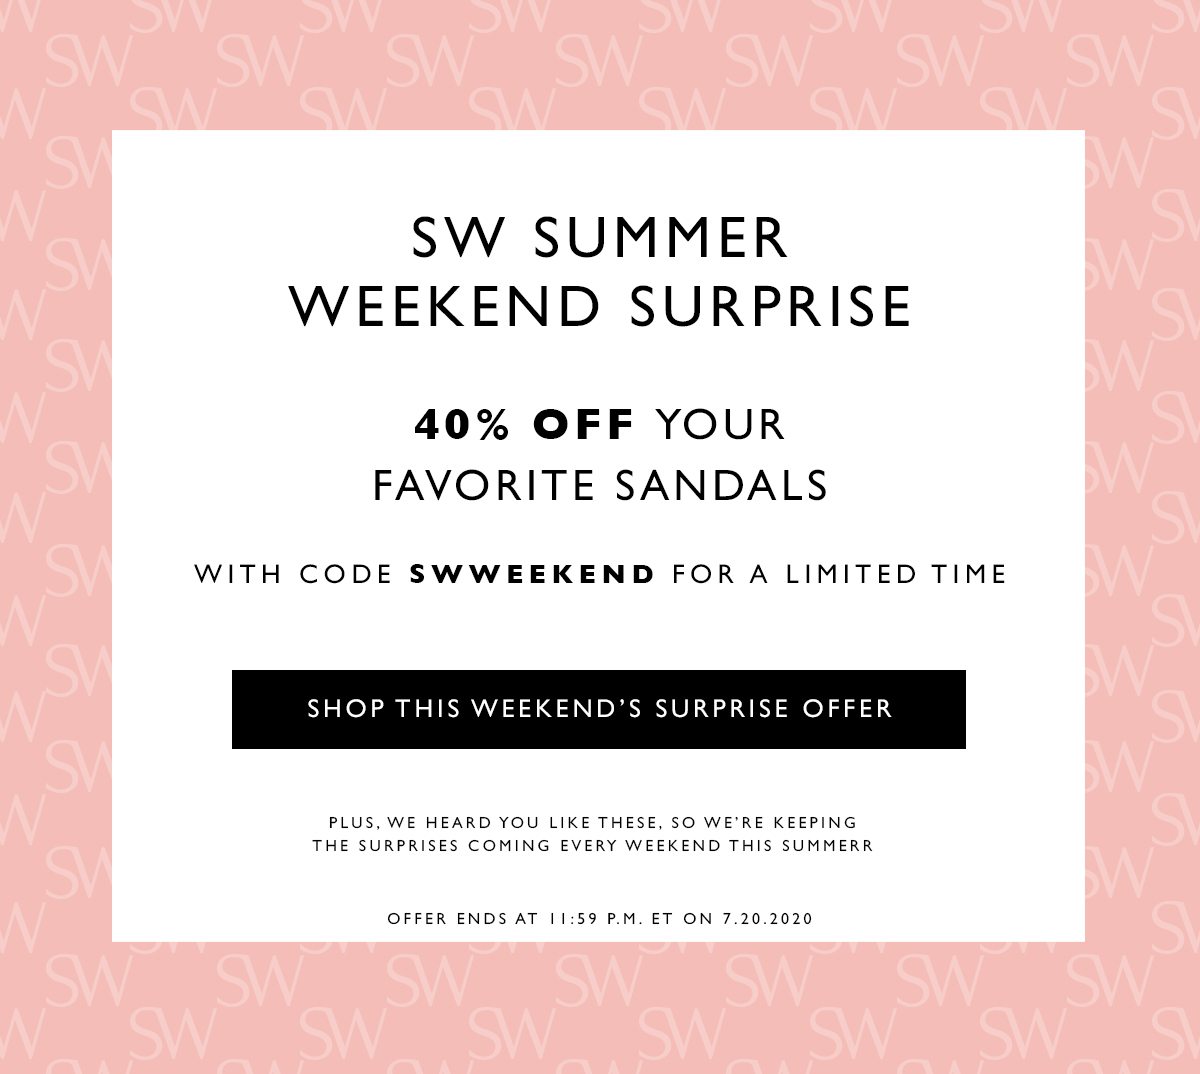 SW Summer Weekend Surprise 40% off your favorite sandals. With code SWWEEKEND for a limited time. SHOP THIS WEEKEND’S SURPRISE OFFER